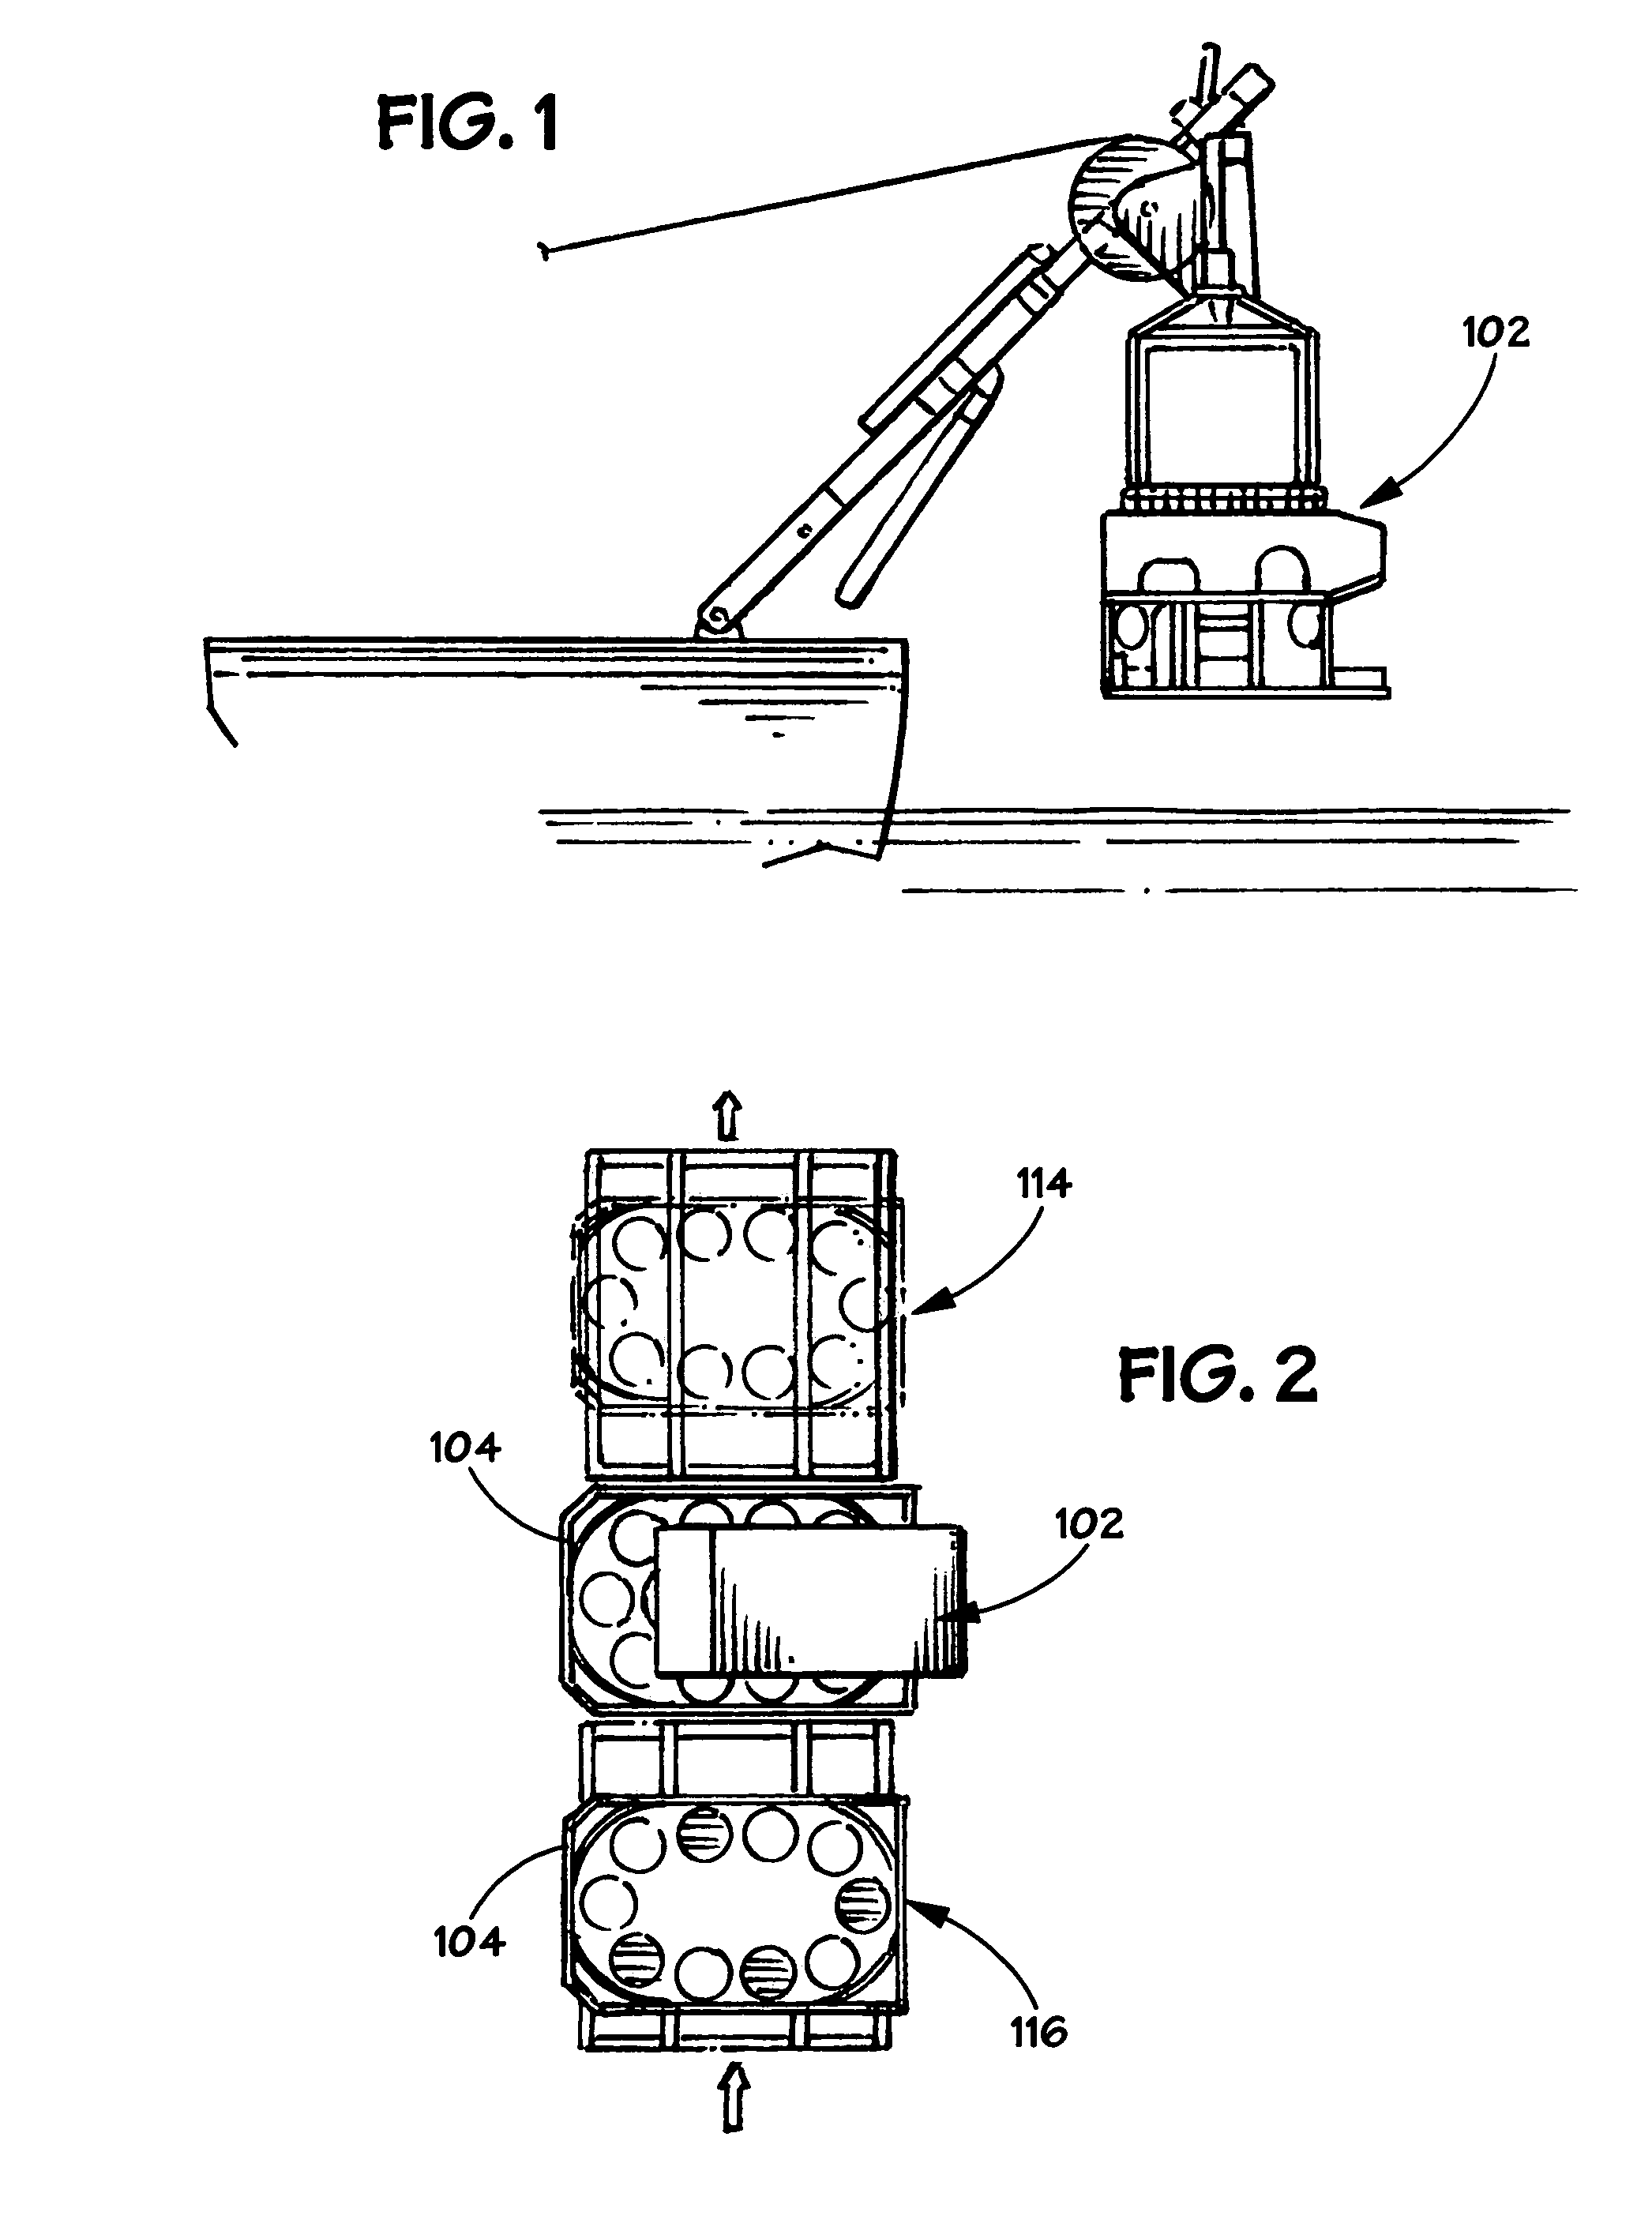 Method and apparatus for installing a sensor array